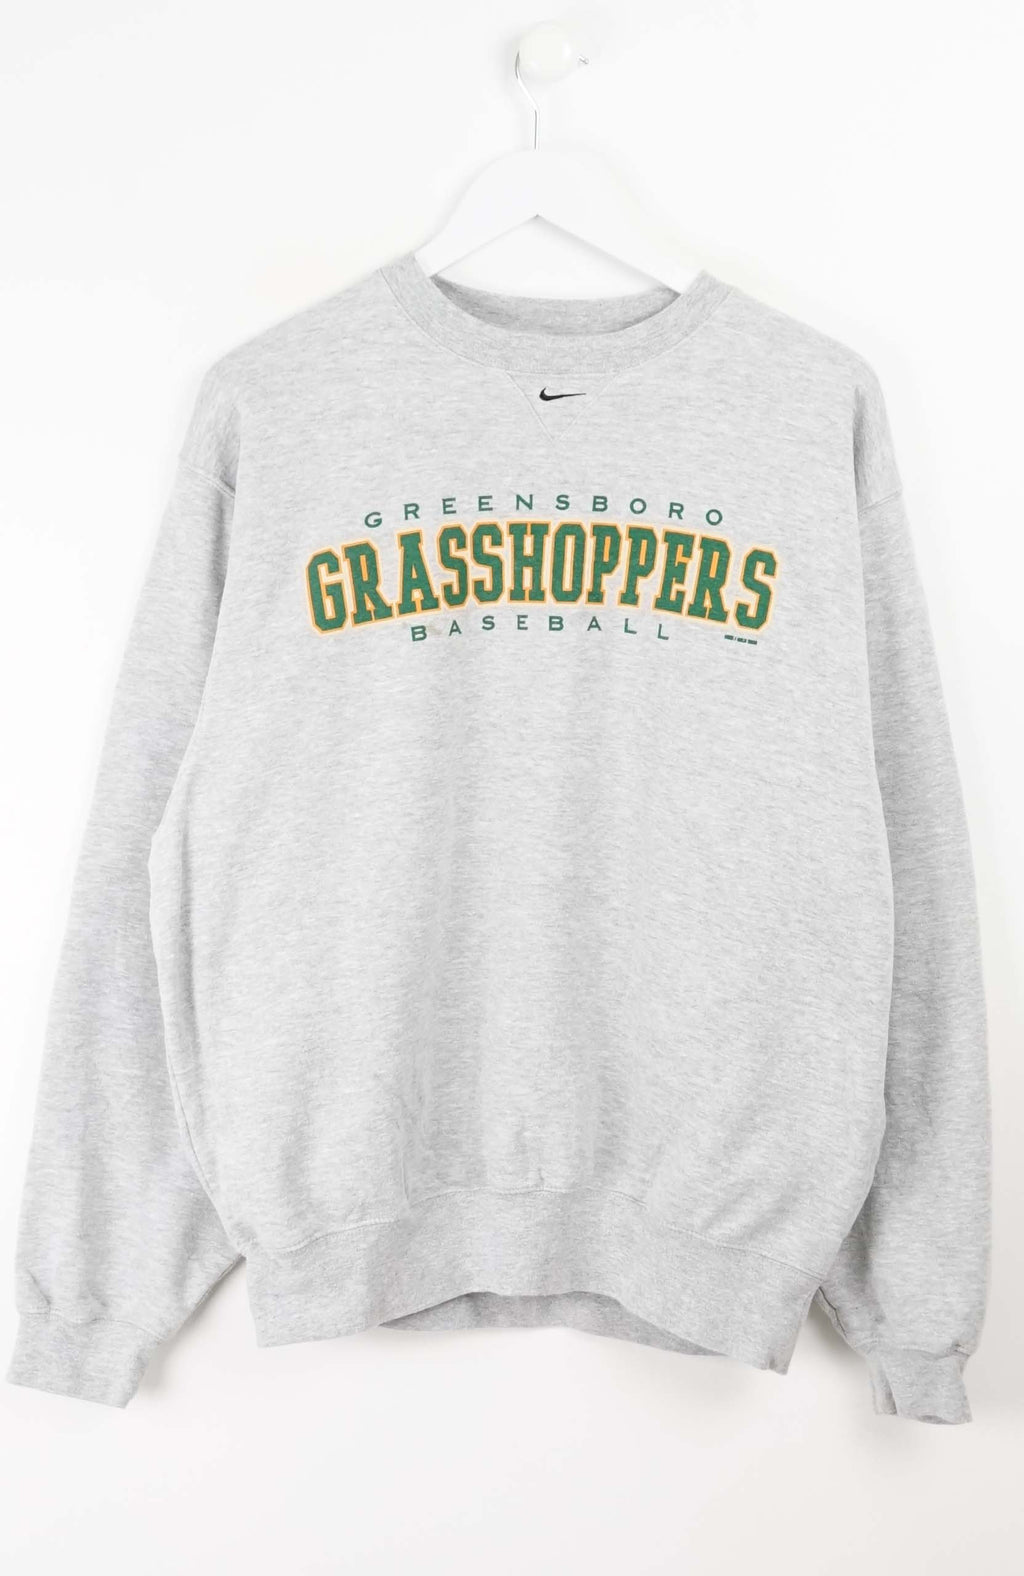 VINTAGE NIKE GRASSHOPPERS SWEATER (M)